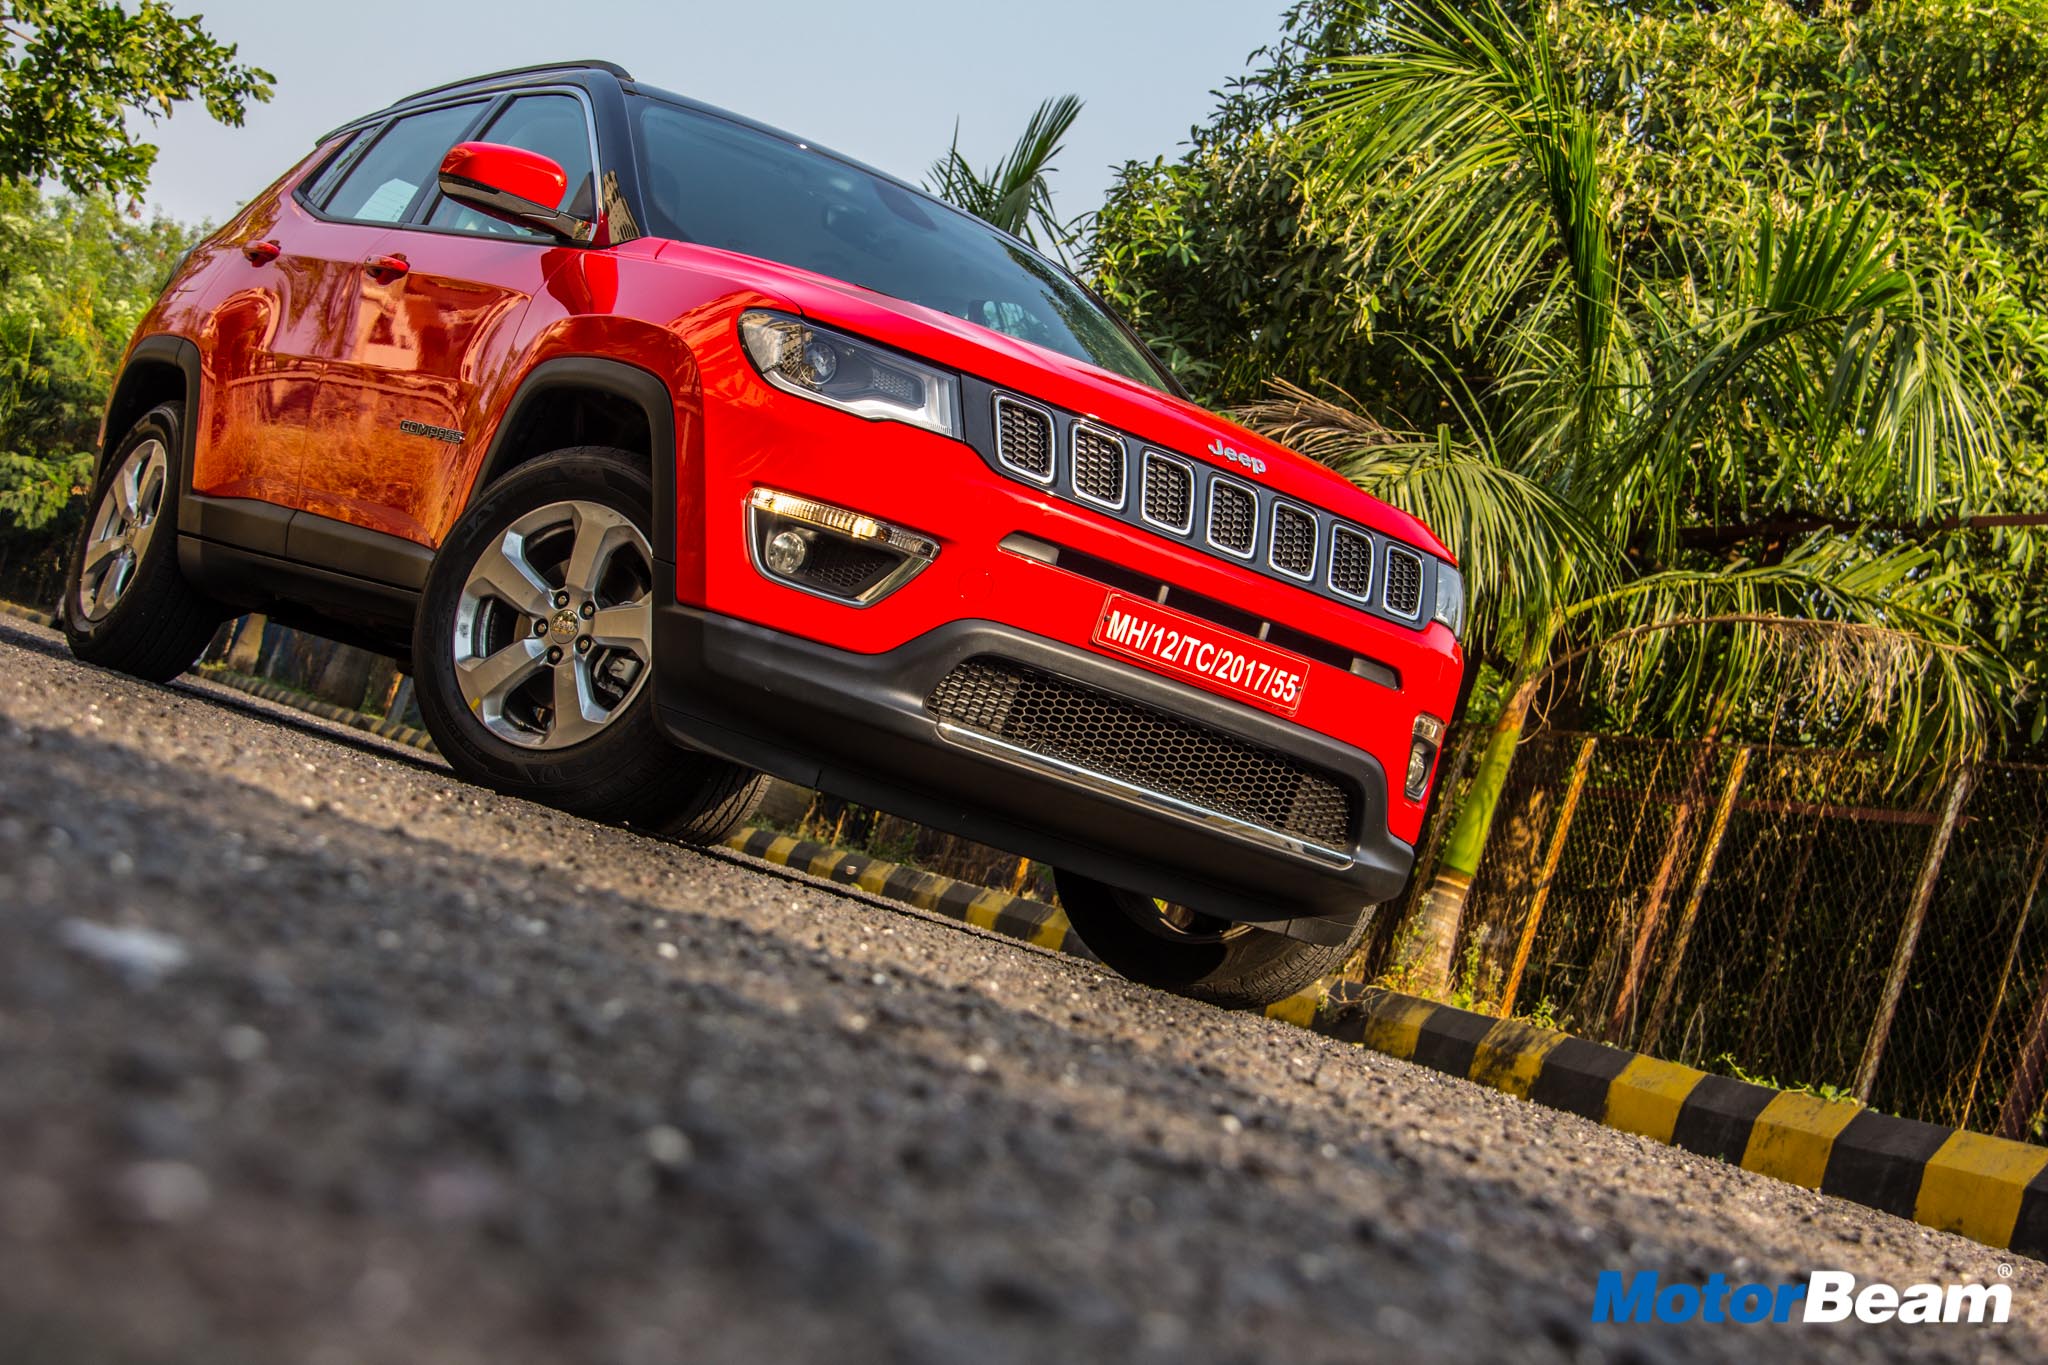 Jeep Compass Petrol Review